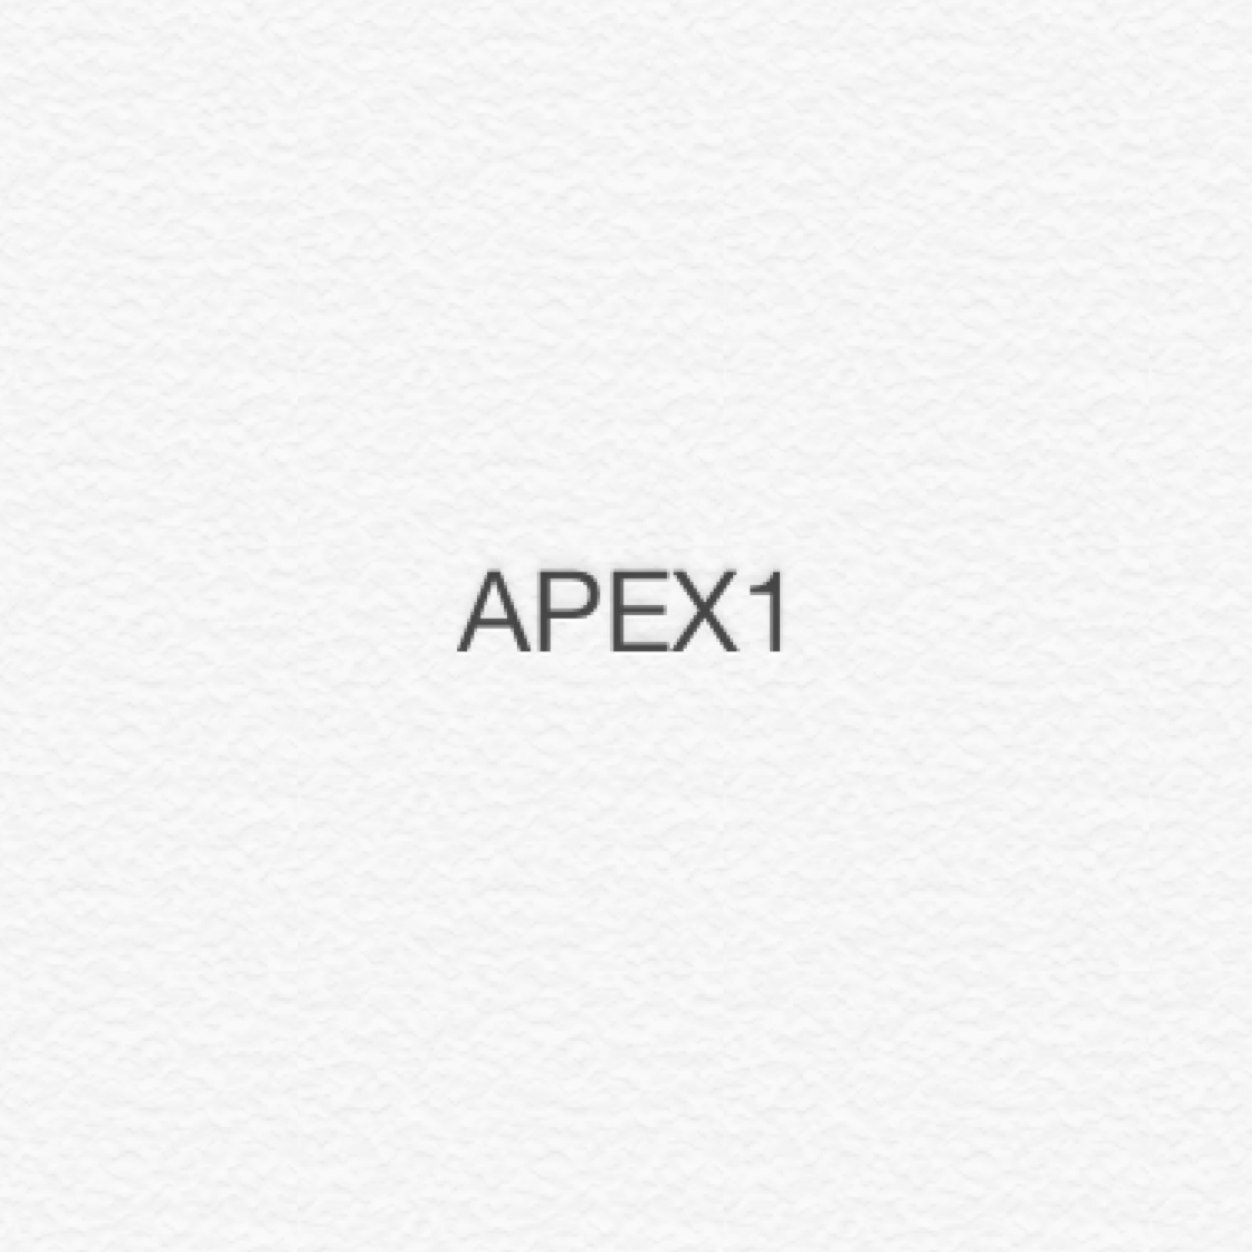 USE THE CODE APEX1 ON ALL OF YOUR KONTROL FREEK, SCUF GAMING, AND G FUEL PRODUCTS